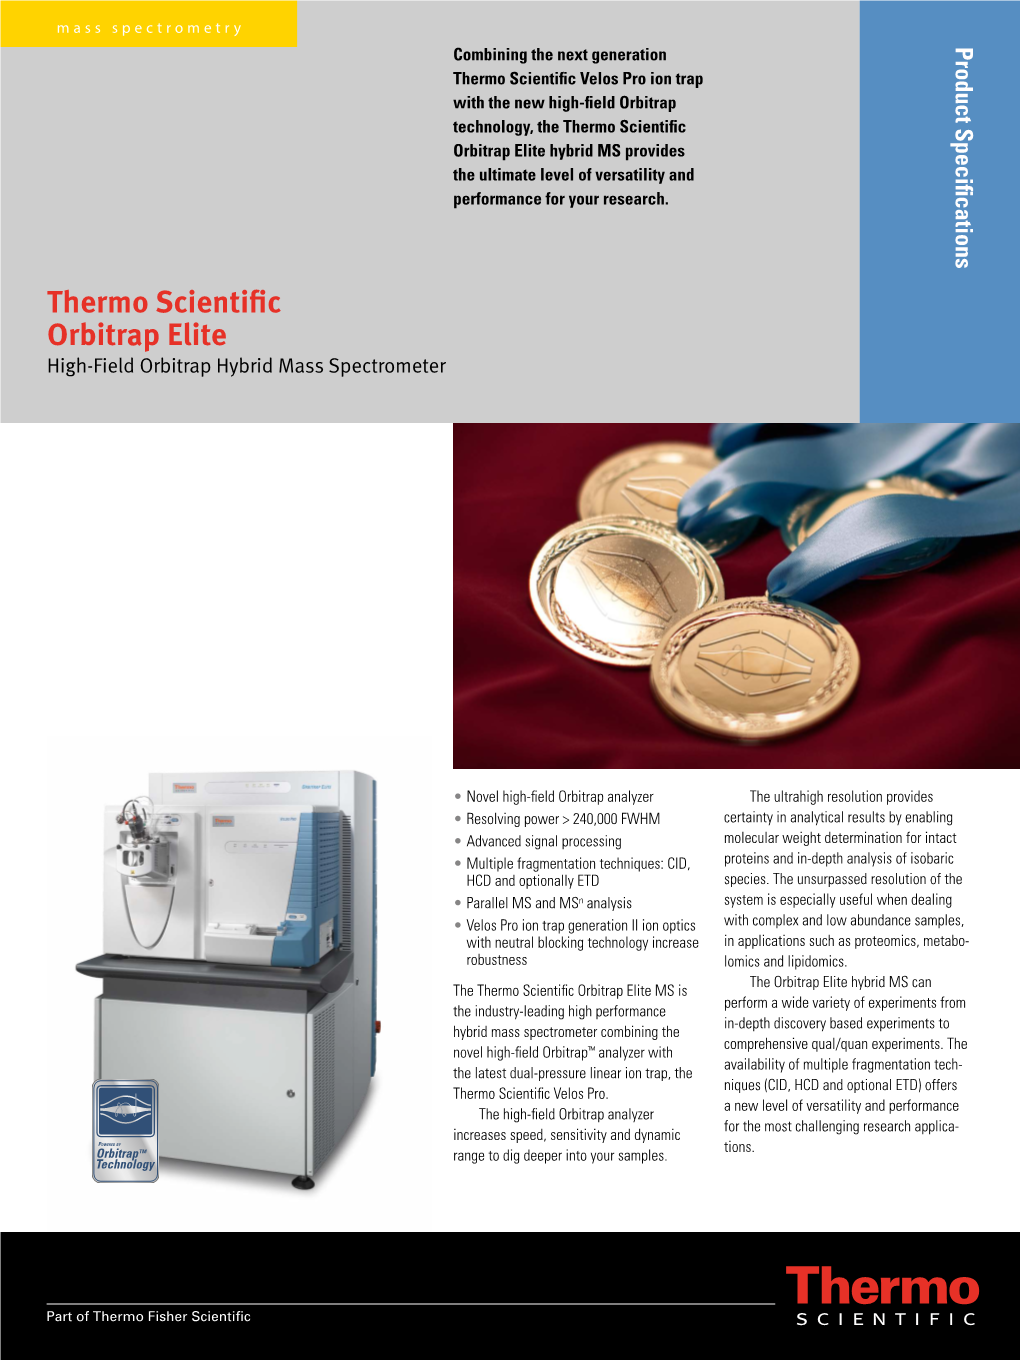 Orbitrap Elite Hybrid MS Provides the Ultimate Level of Versatility and Performance for Your Research